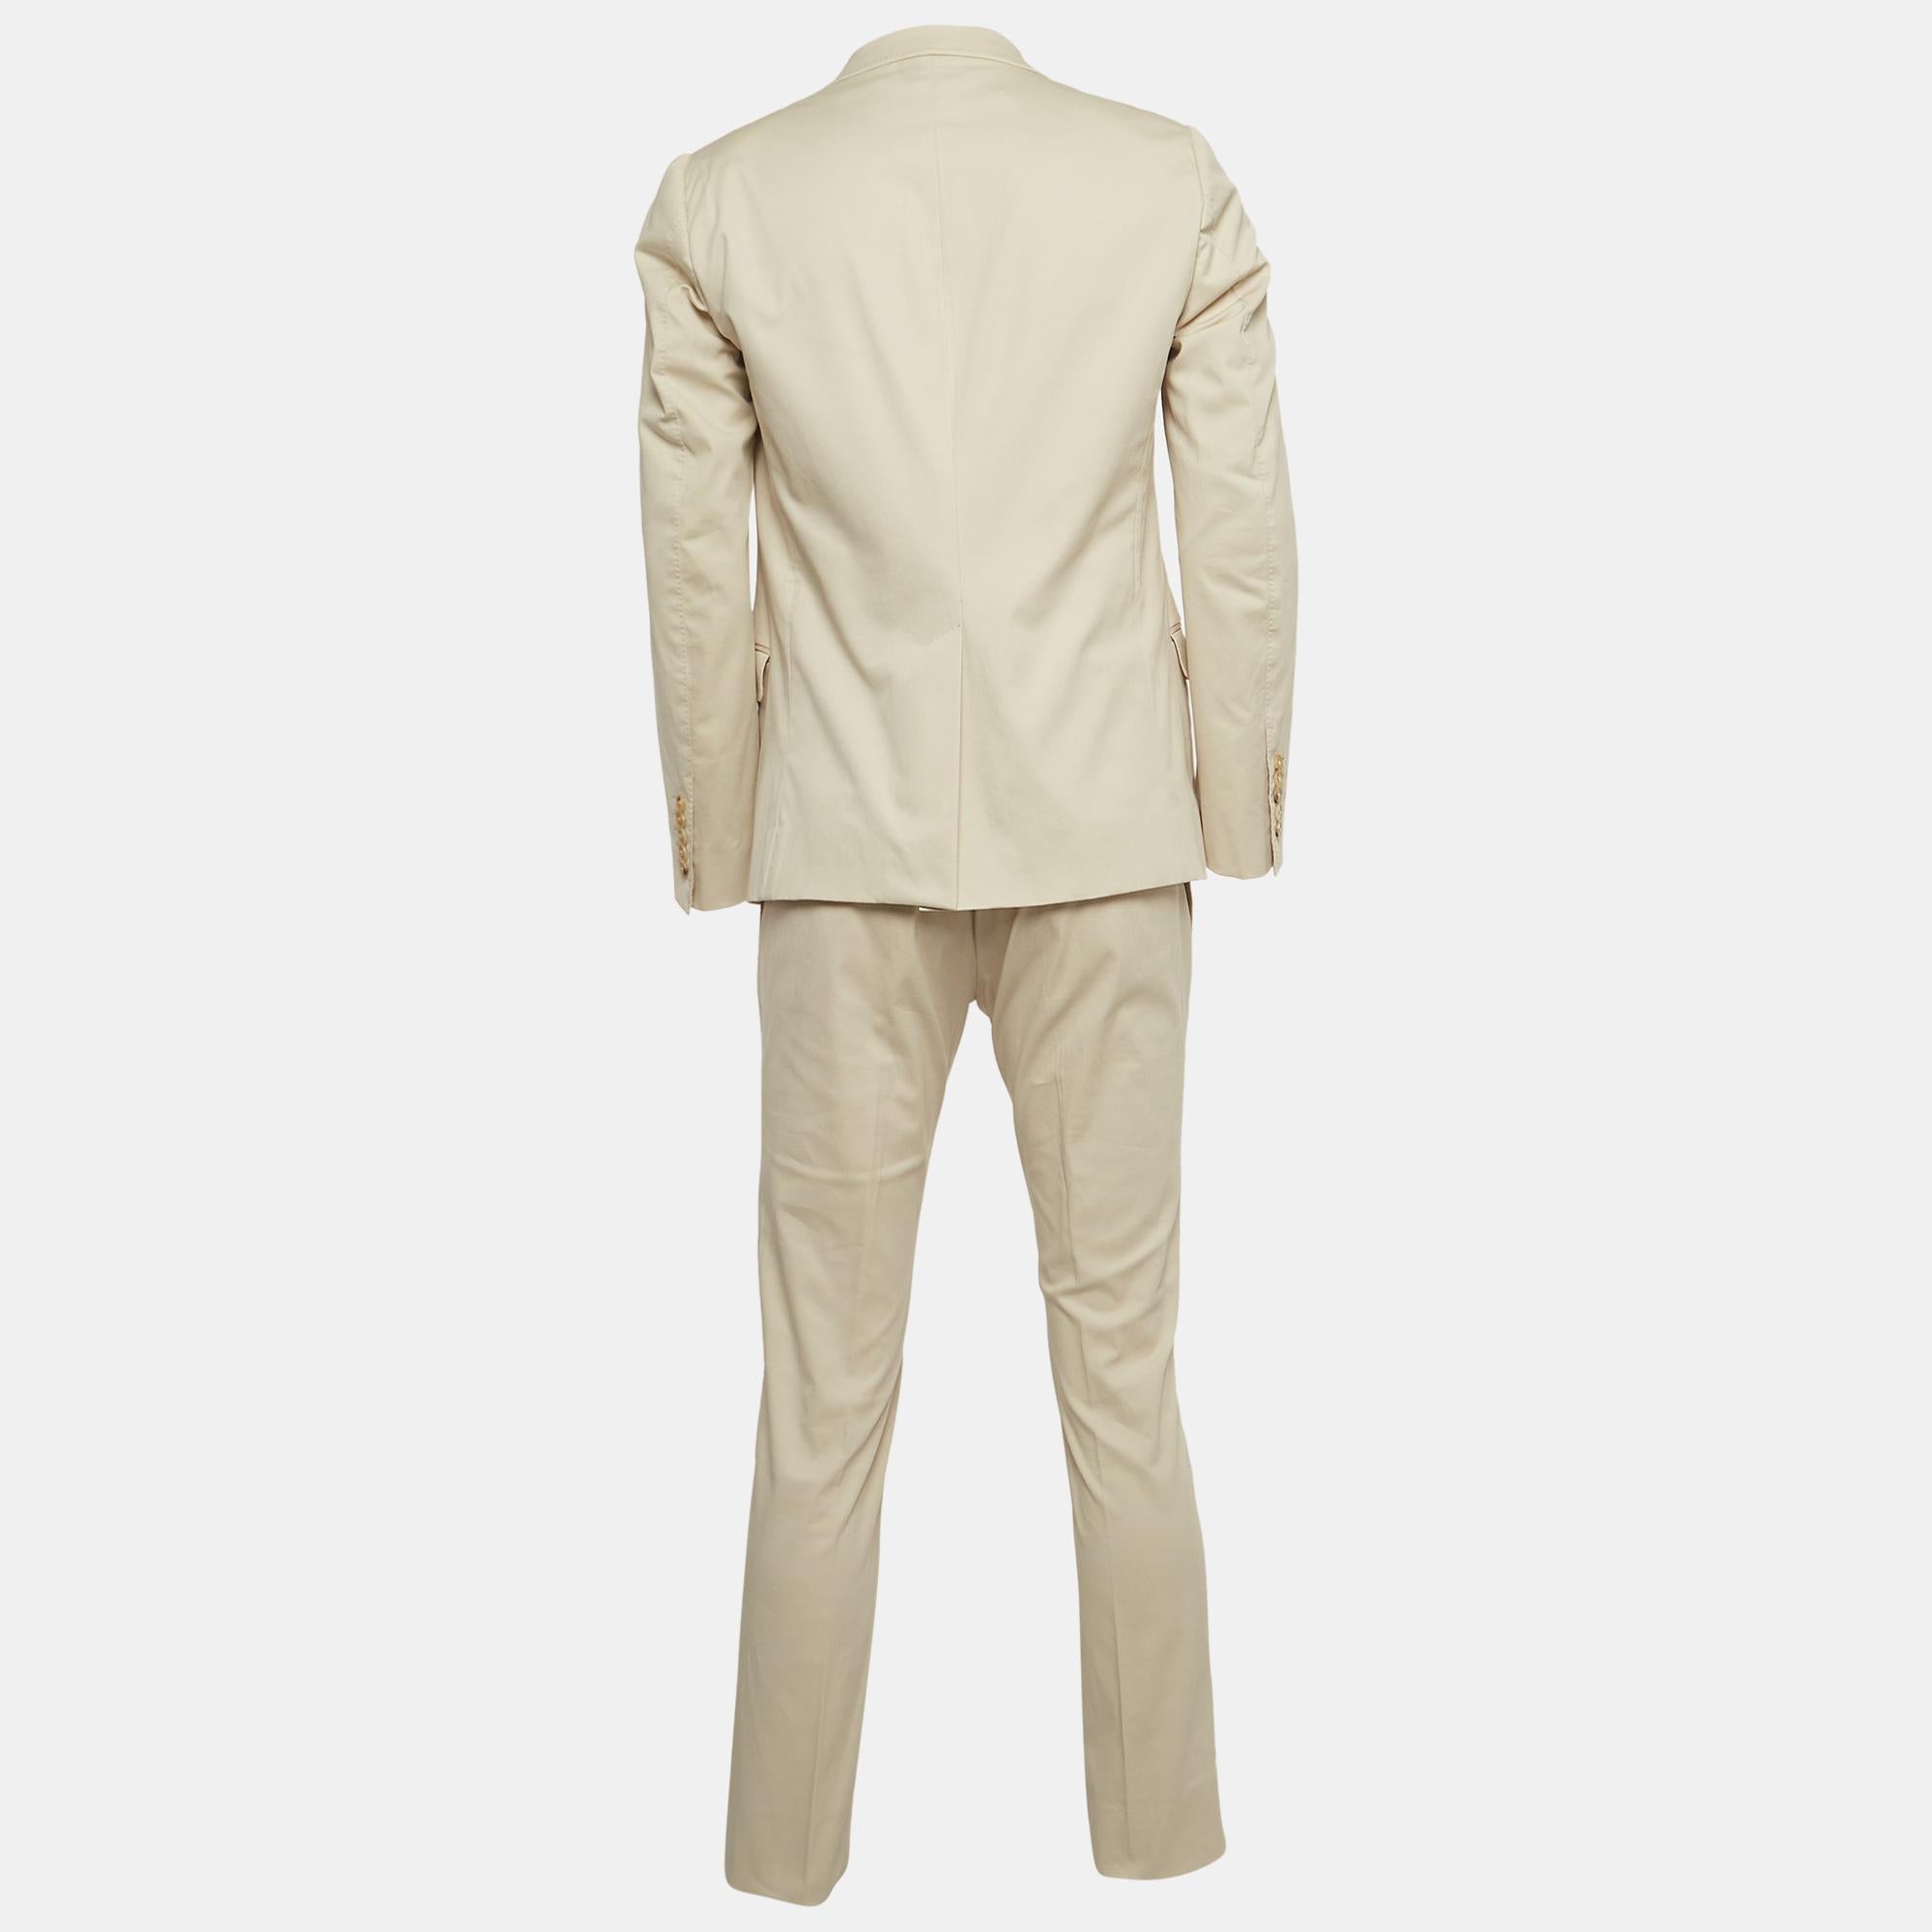 Characterized by impeccable tailoring, a good fit, and the use of quality materials, this Gucci suit set will help you serve dapper looks. Style it with oxfords or loafers to bring out the stylish appeal of the creation.

